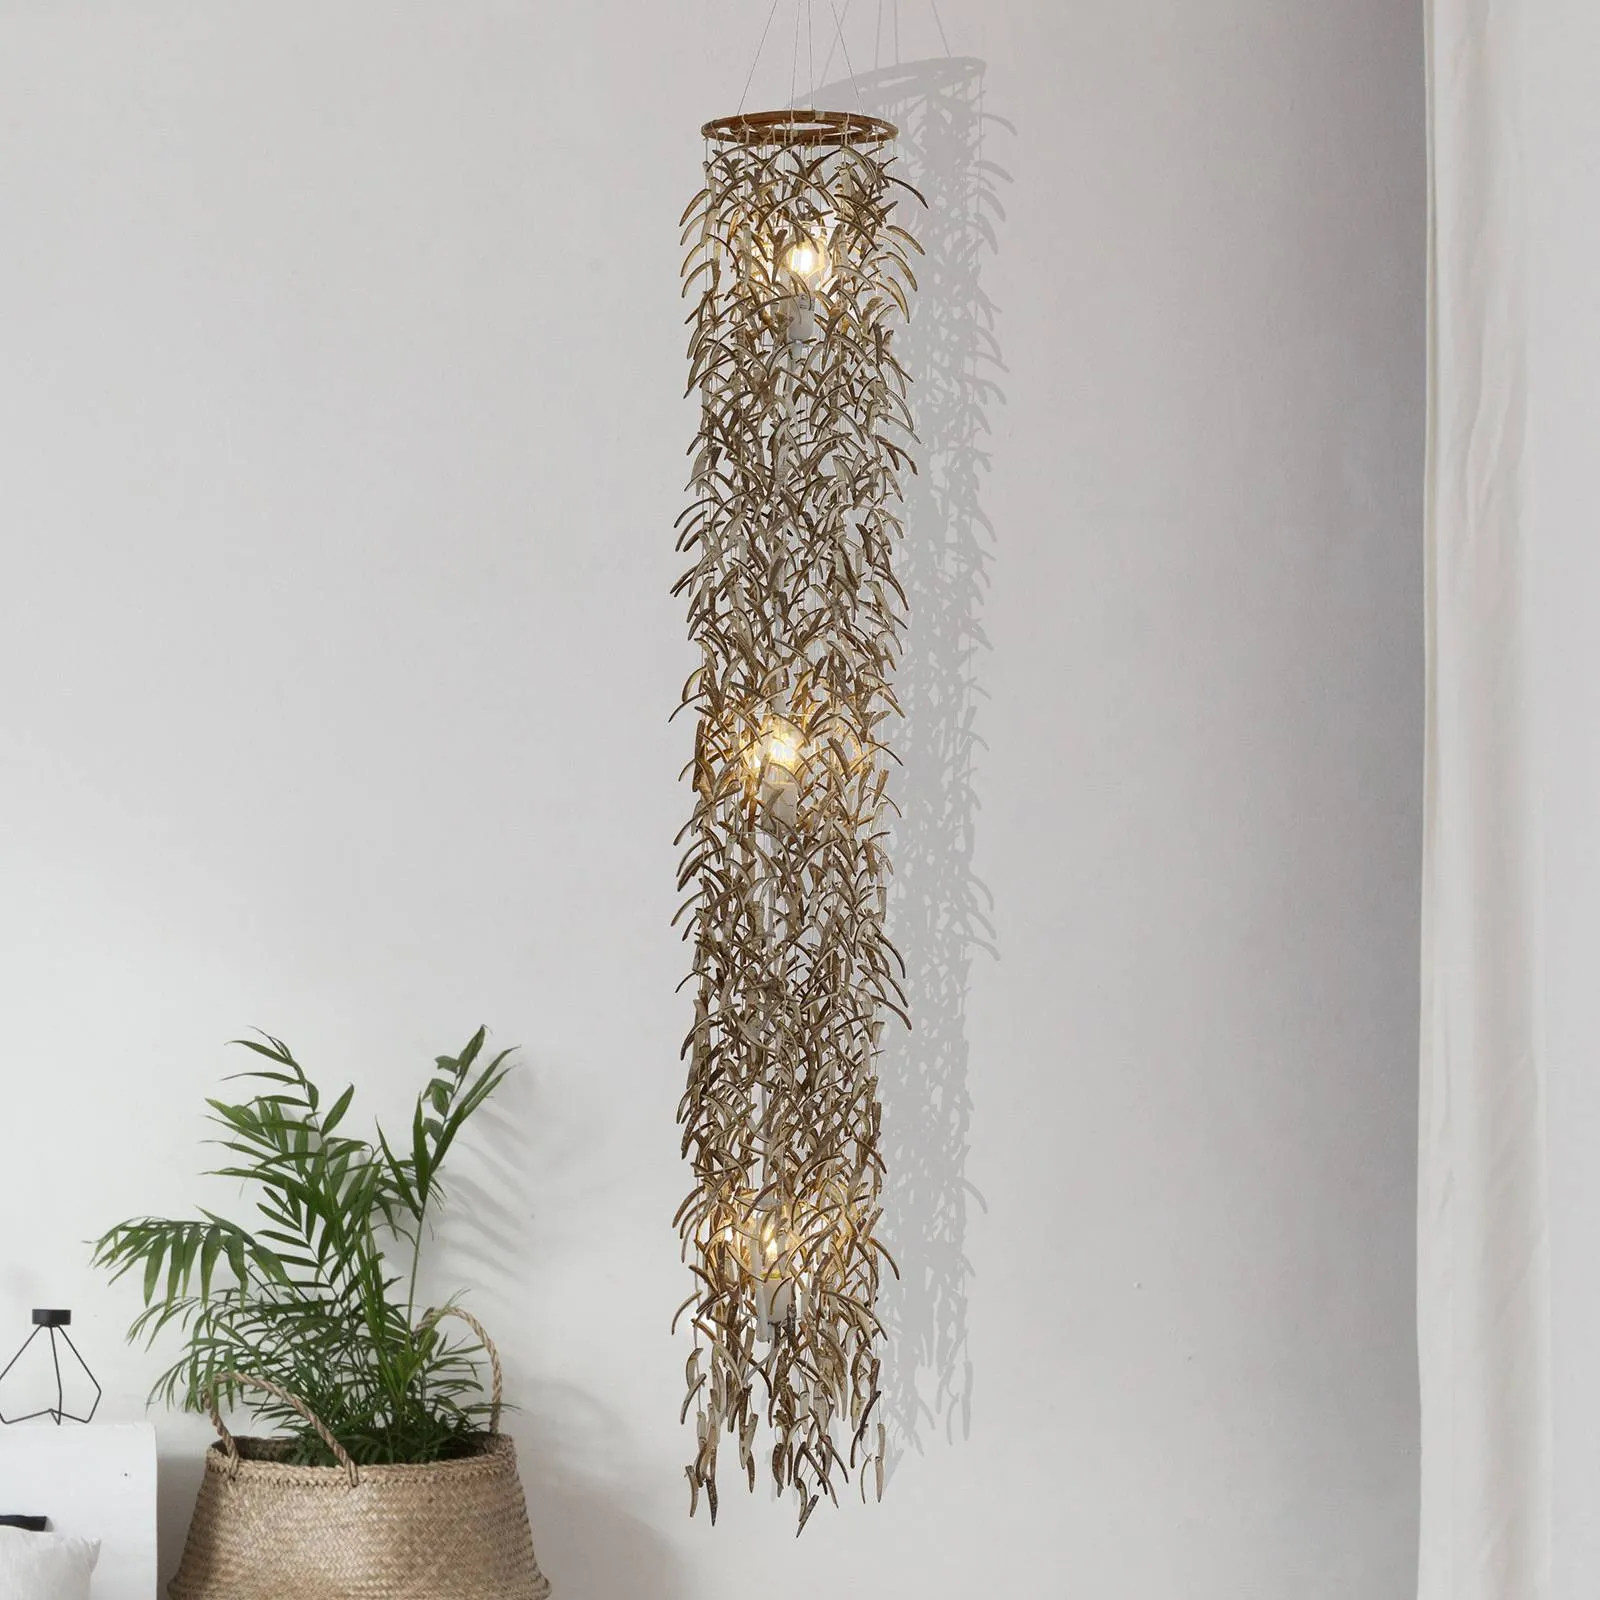 Coconut hanging light made of real coconut, 180 cm